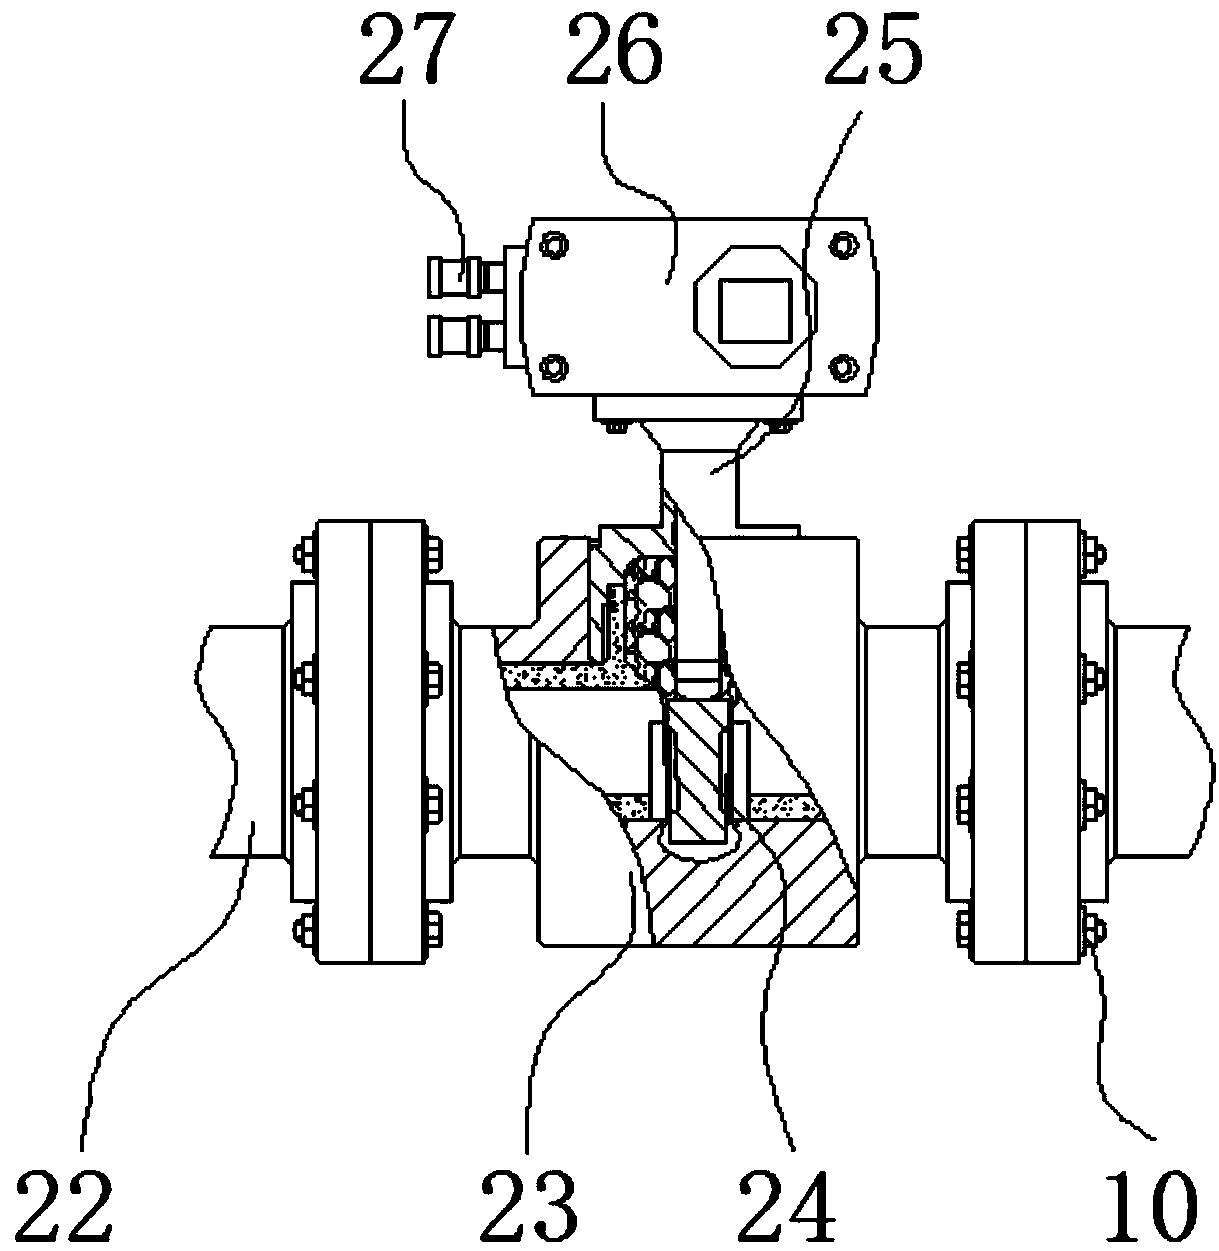 Petroleum collecting device for petroleum drilling and production